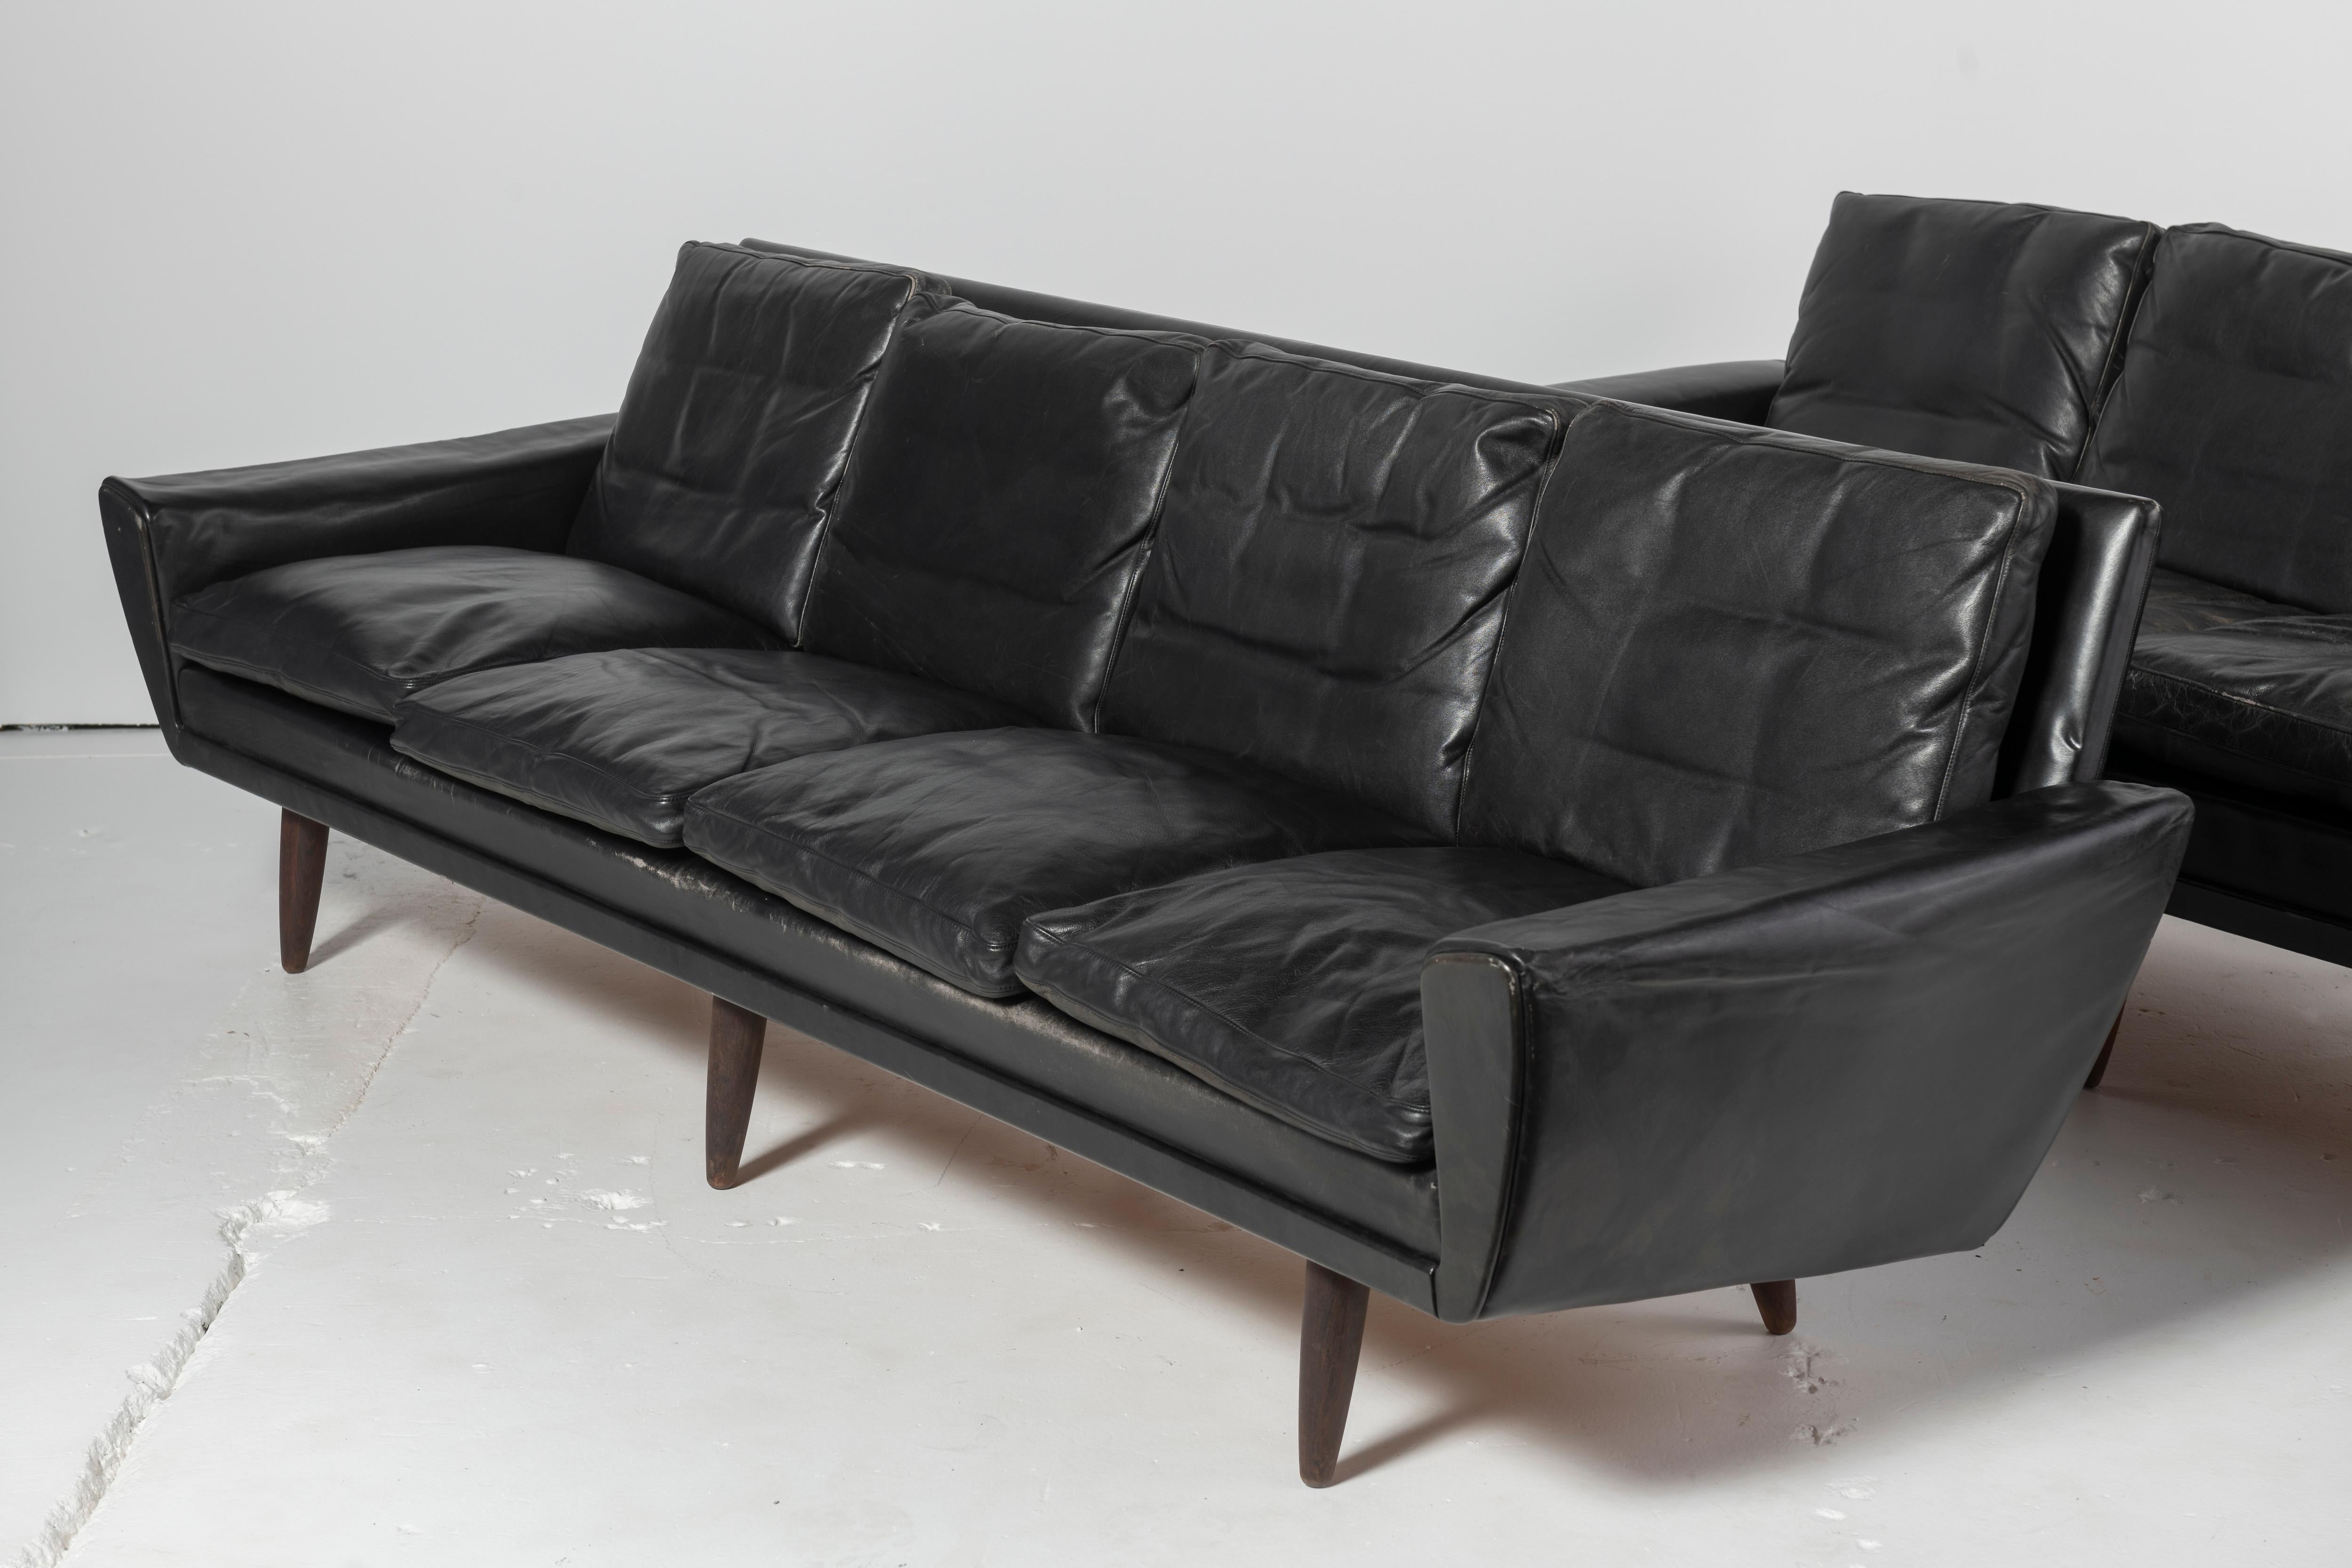 Extra long Danish sofas with original leather upholstery that are very comfortable. One of the sofas has a different cushion from the other 8, though it appears to be a close match. 


 